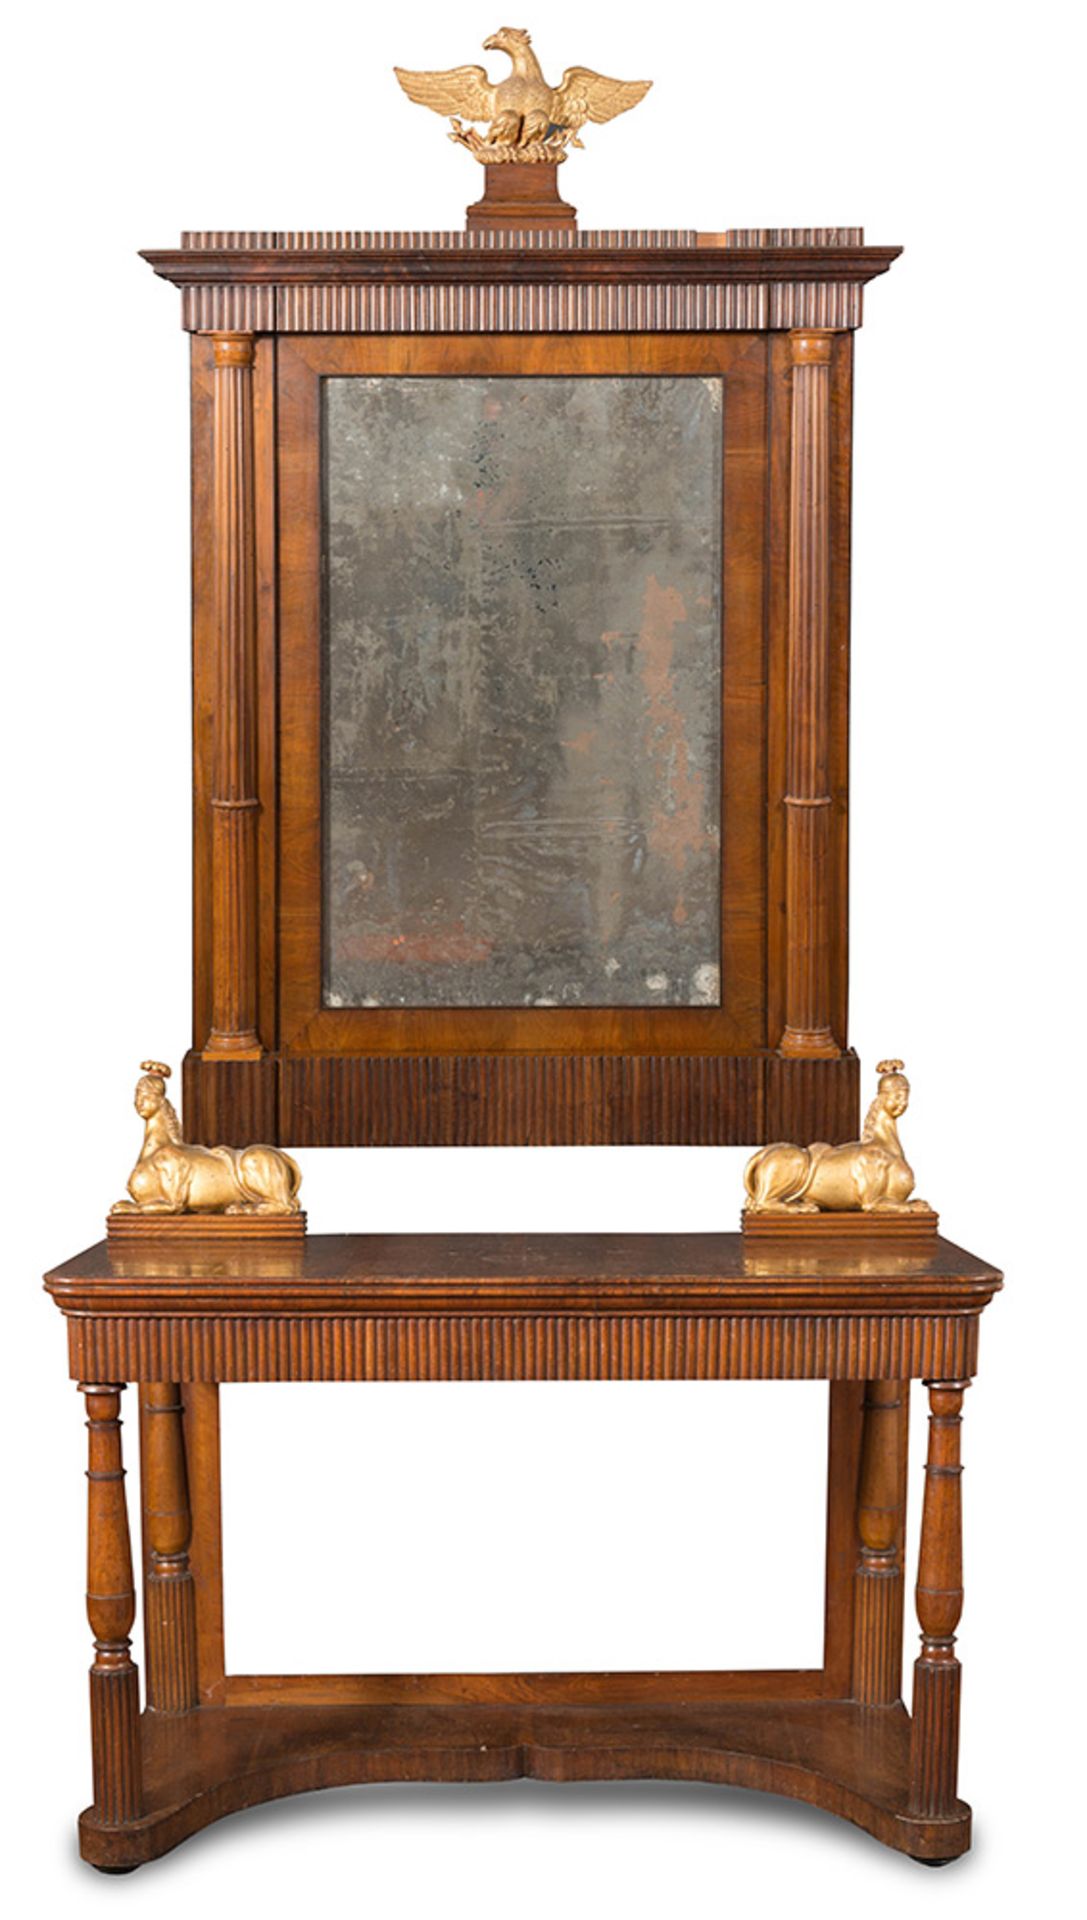 Walnut console and mirror, carved giltwood decorations, in the manner of Agostino Fantastici